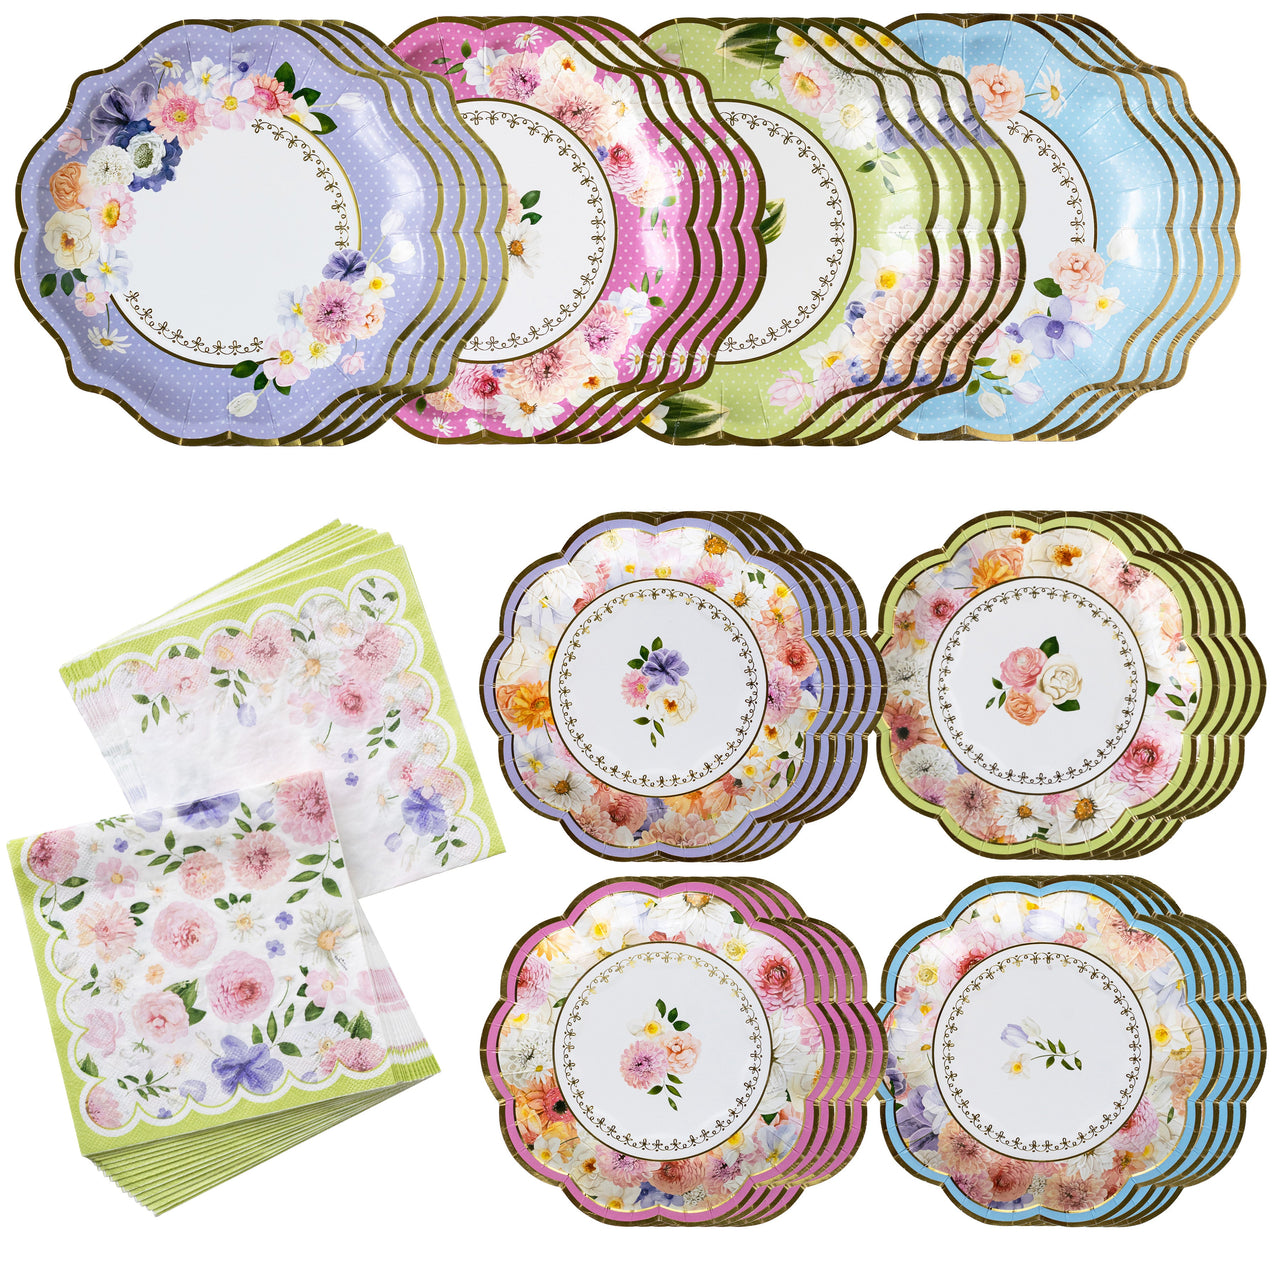 156 Pc. Tie-Dye Swirl Disposable Tableware Kit for 24 Guests